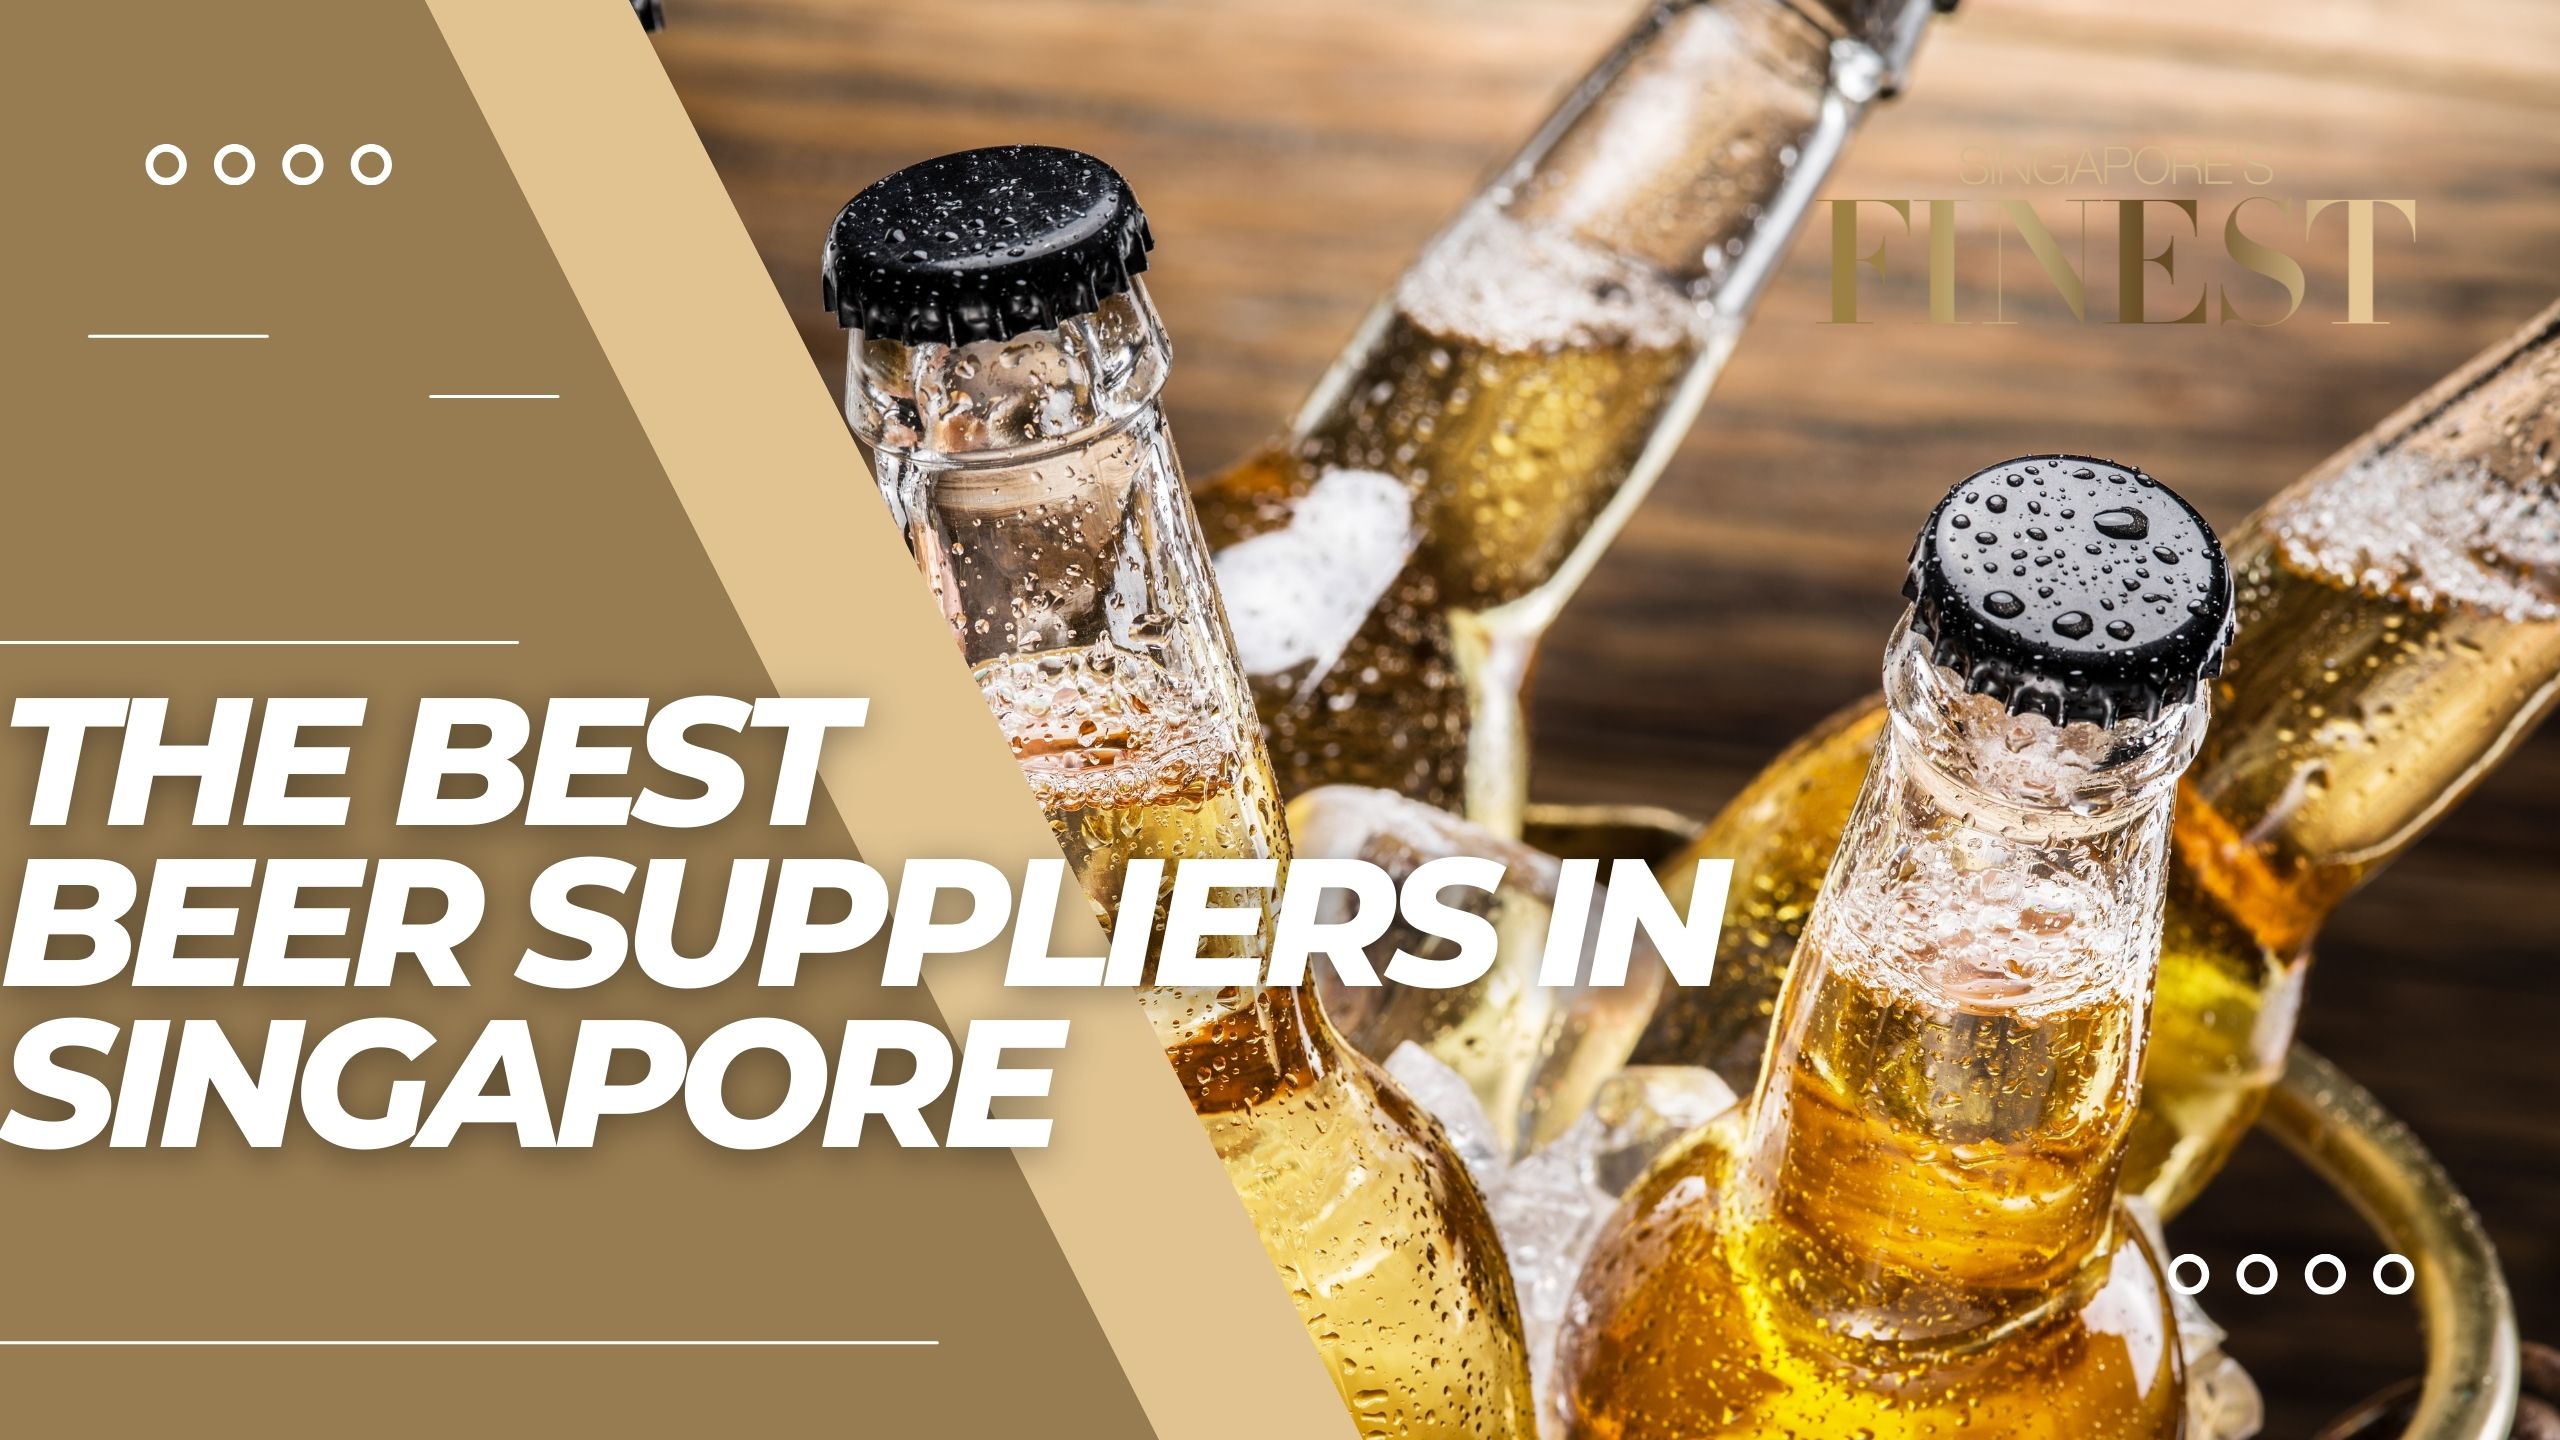 The Finest Beer Suppliers in Singapore